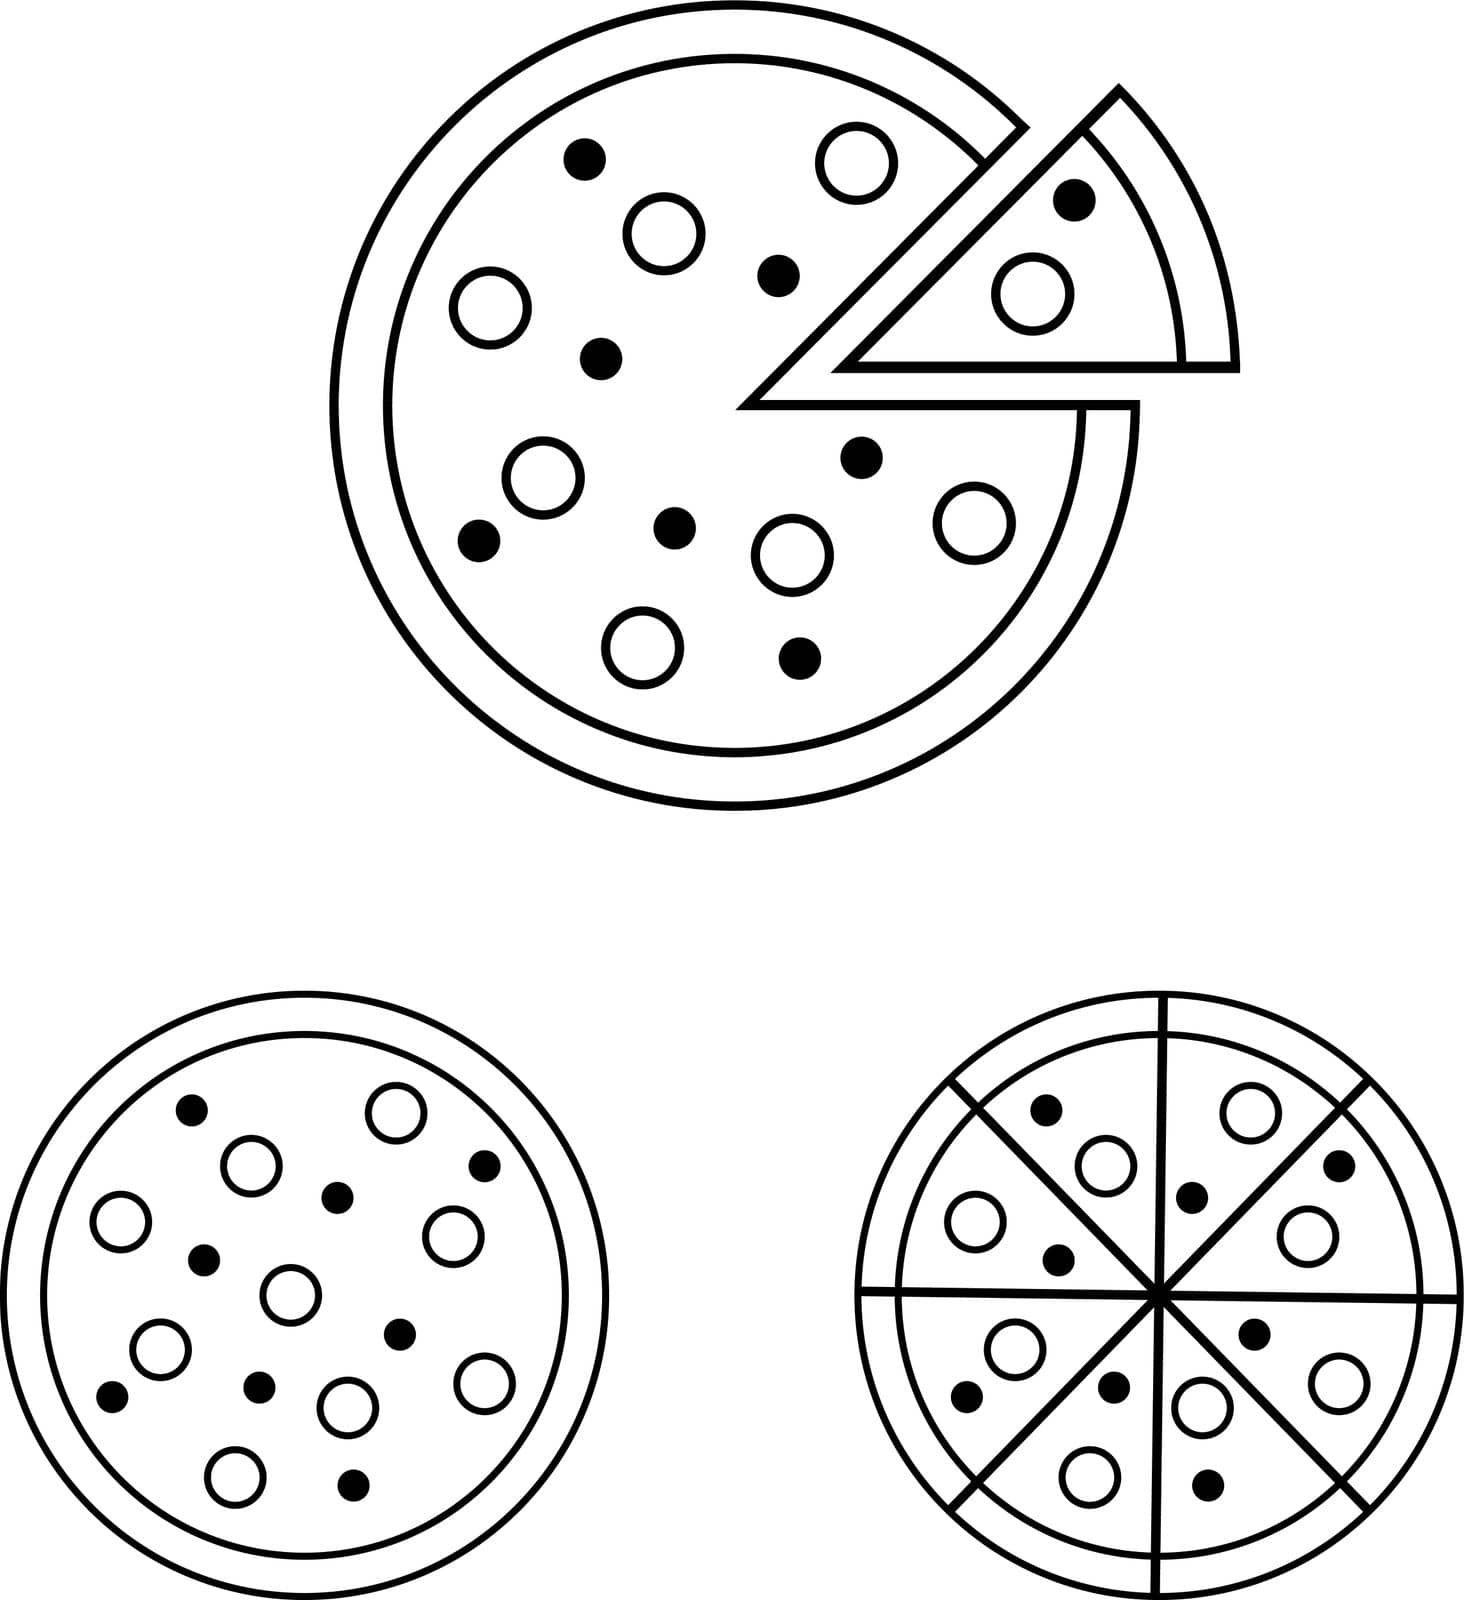 Pizza, vector. Pizza icons, whole pizza and cut pizza.